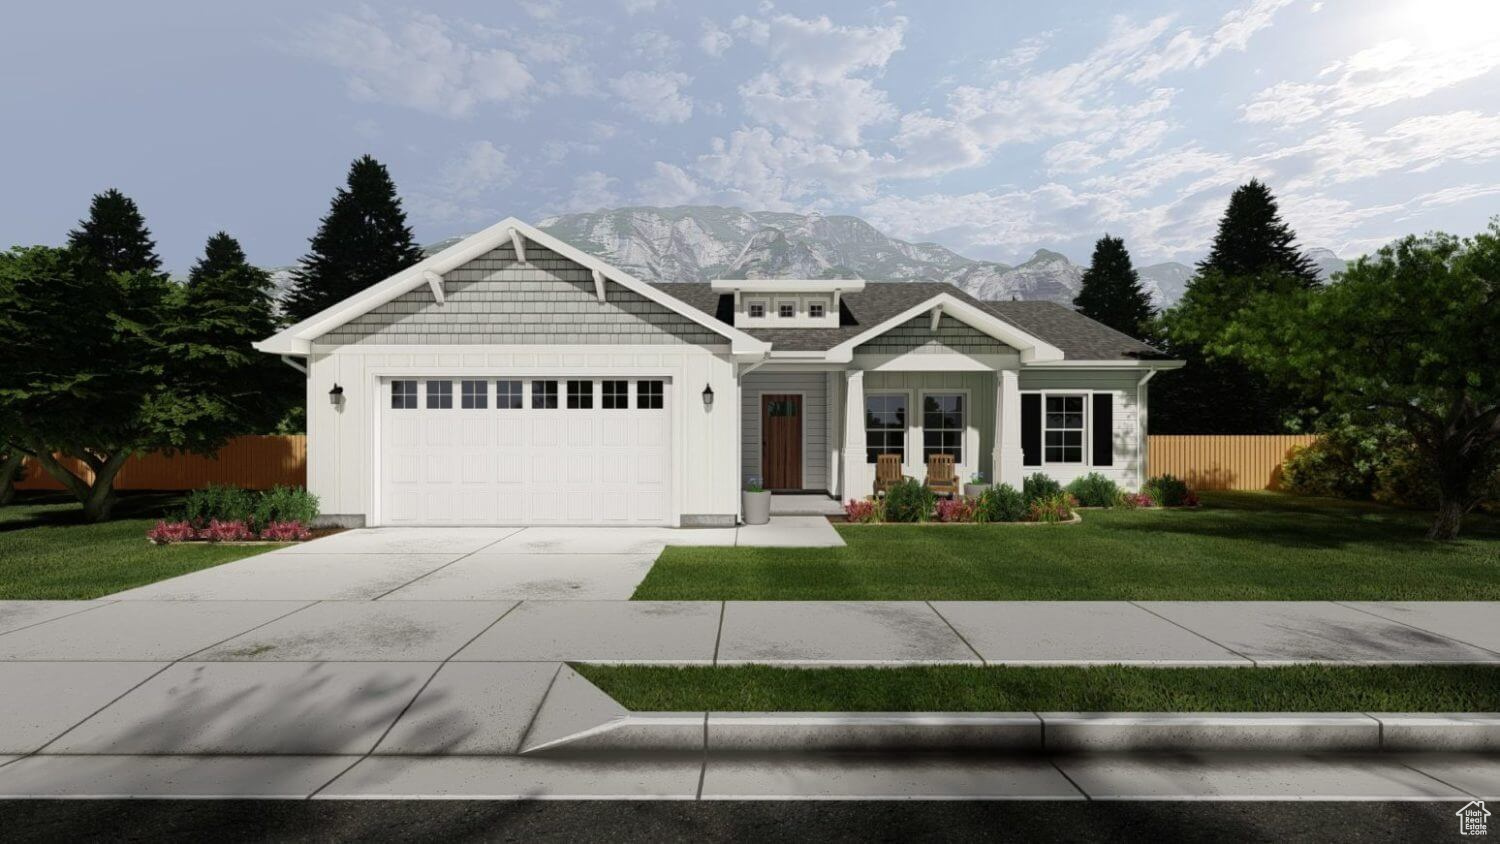 Craftsman inspired home with a garage, a front yard, and a mountain view